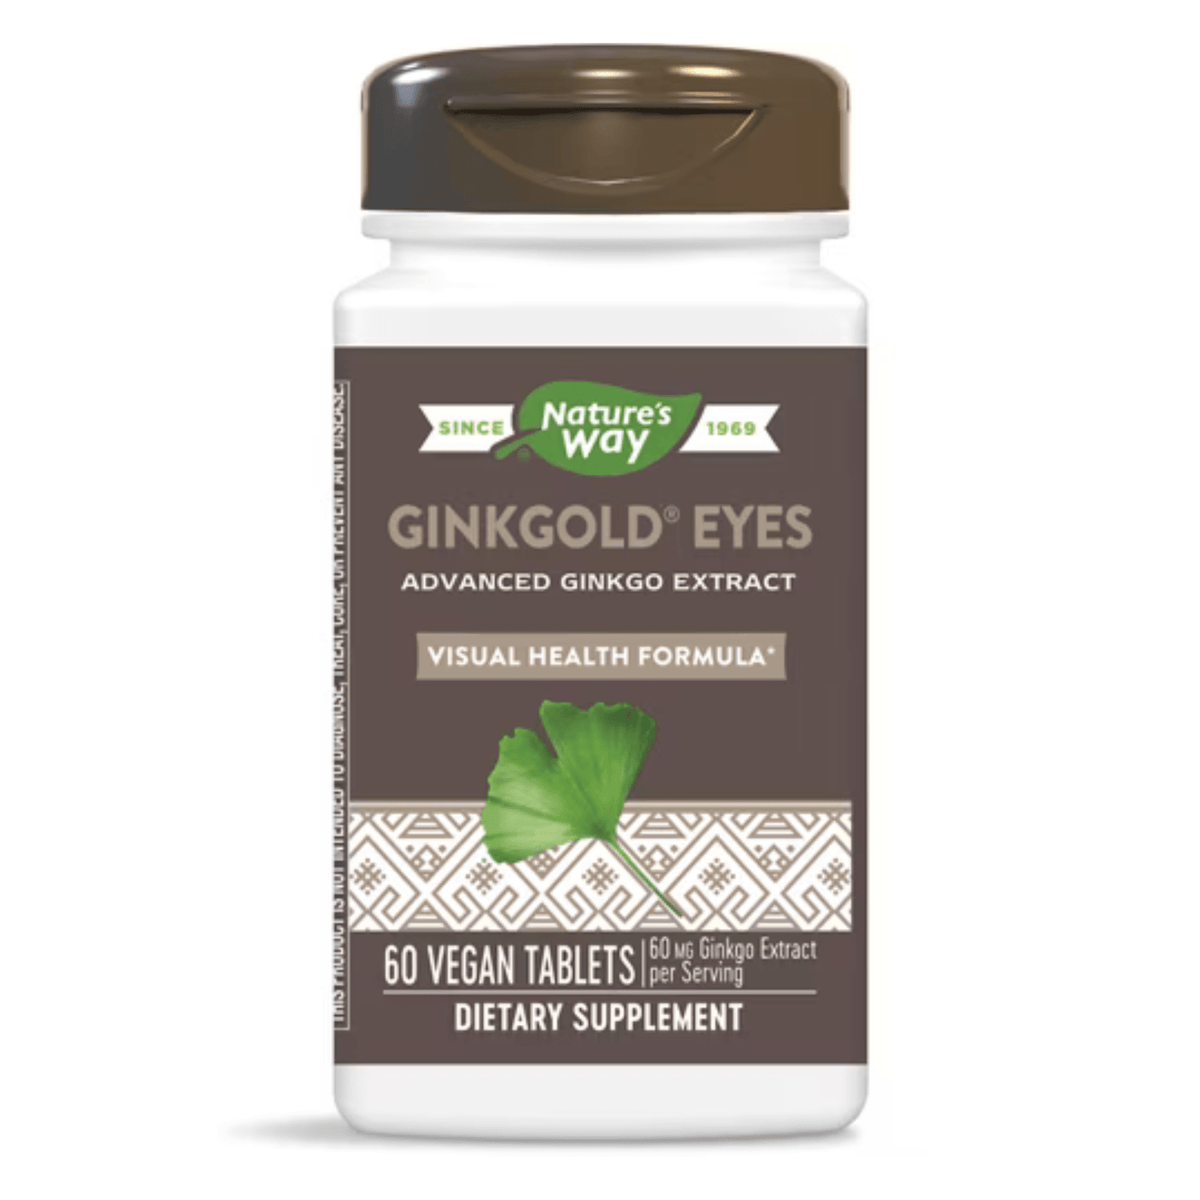 Primary Image of Ginkgold Eyes Vegan Tablets